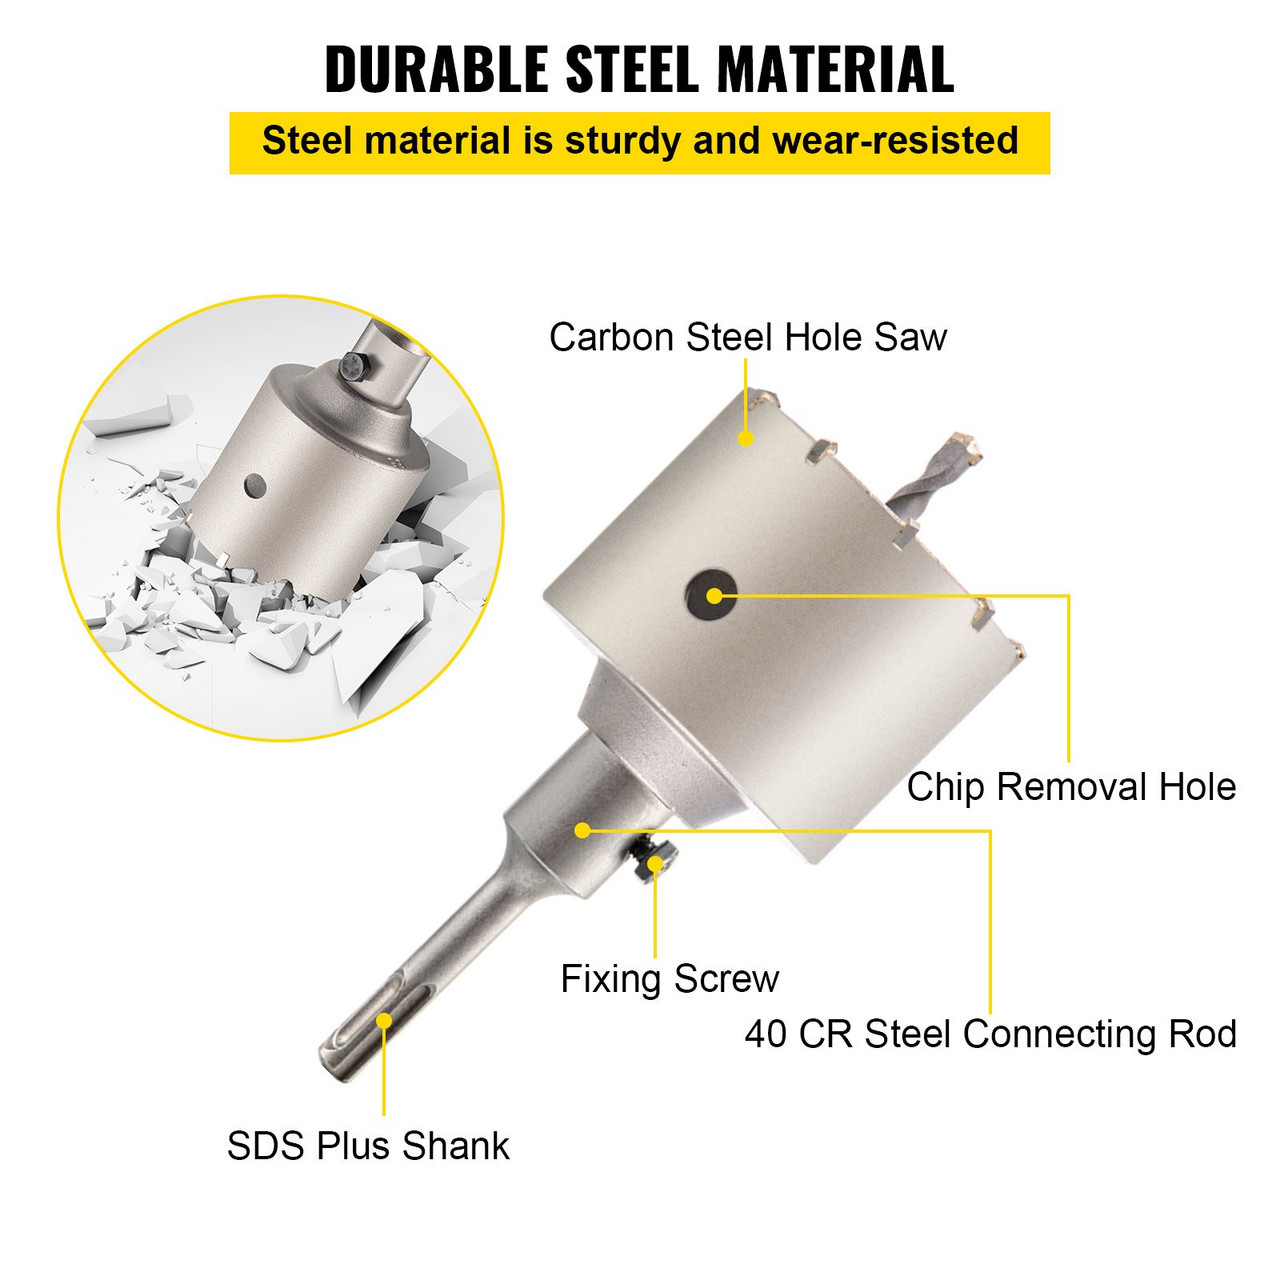 Concrete Hole Saw Kit, 1-3/5", 2-9/16", 3-5/32", 3-15/16", 4-9/10" Drill Bit Set SDS Plus Shank Wall Hole Cutter w/a 4-1/3" Connecting Rod for Brick, Concrete, Cement, Stone Wall, Masonry, Tile